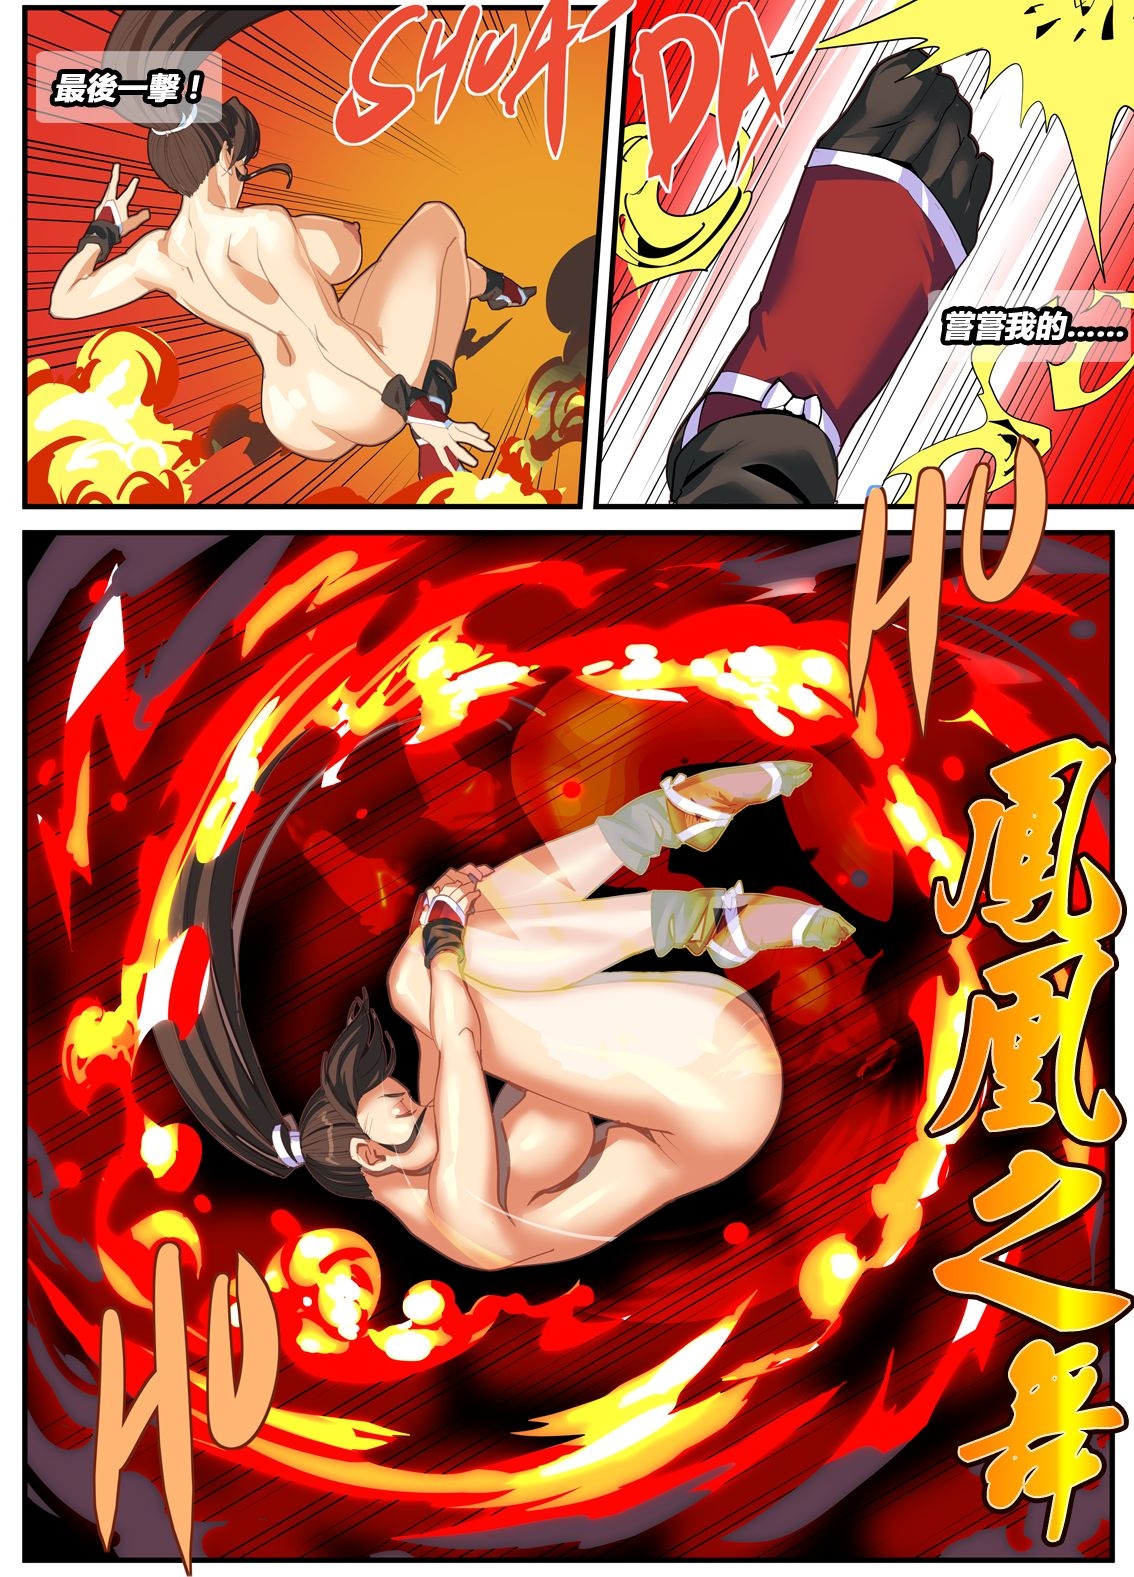 [chunlieater] The Lust of Mai Shiranui (King of Fighters) [Chinese] 28